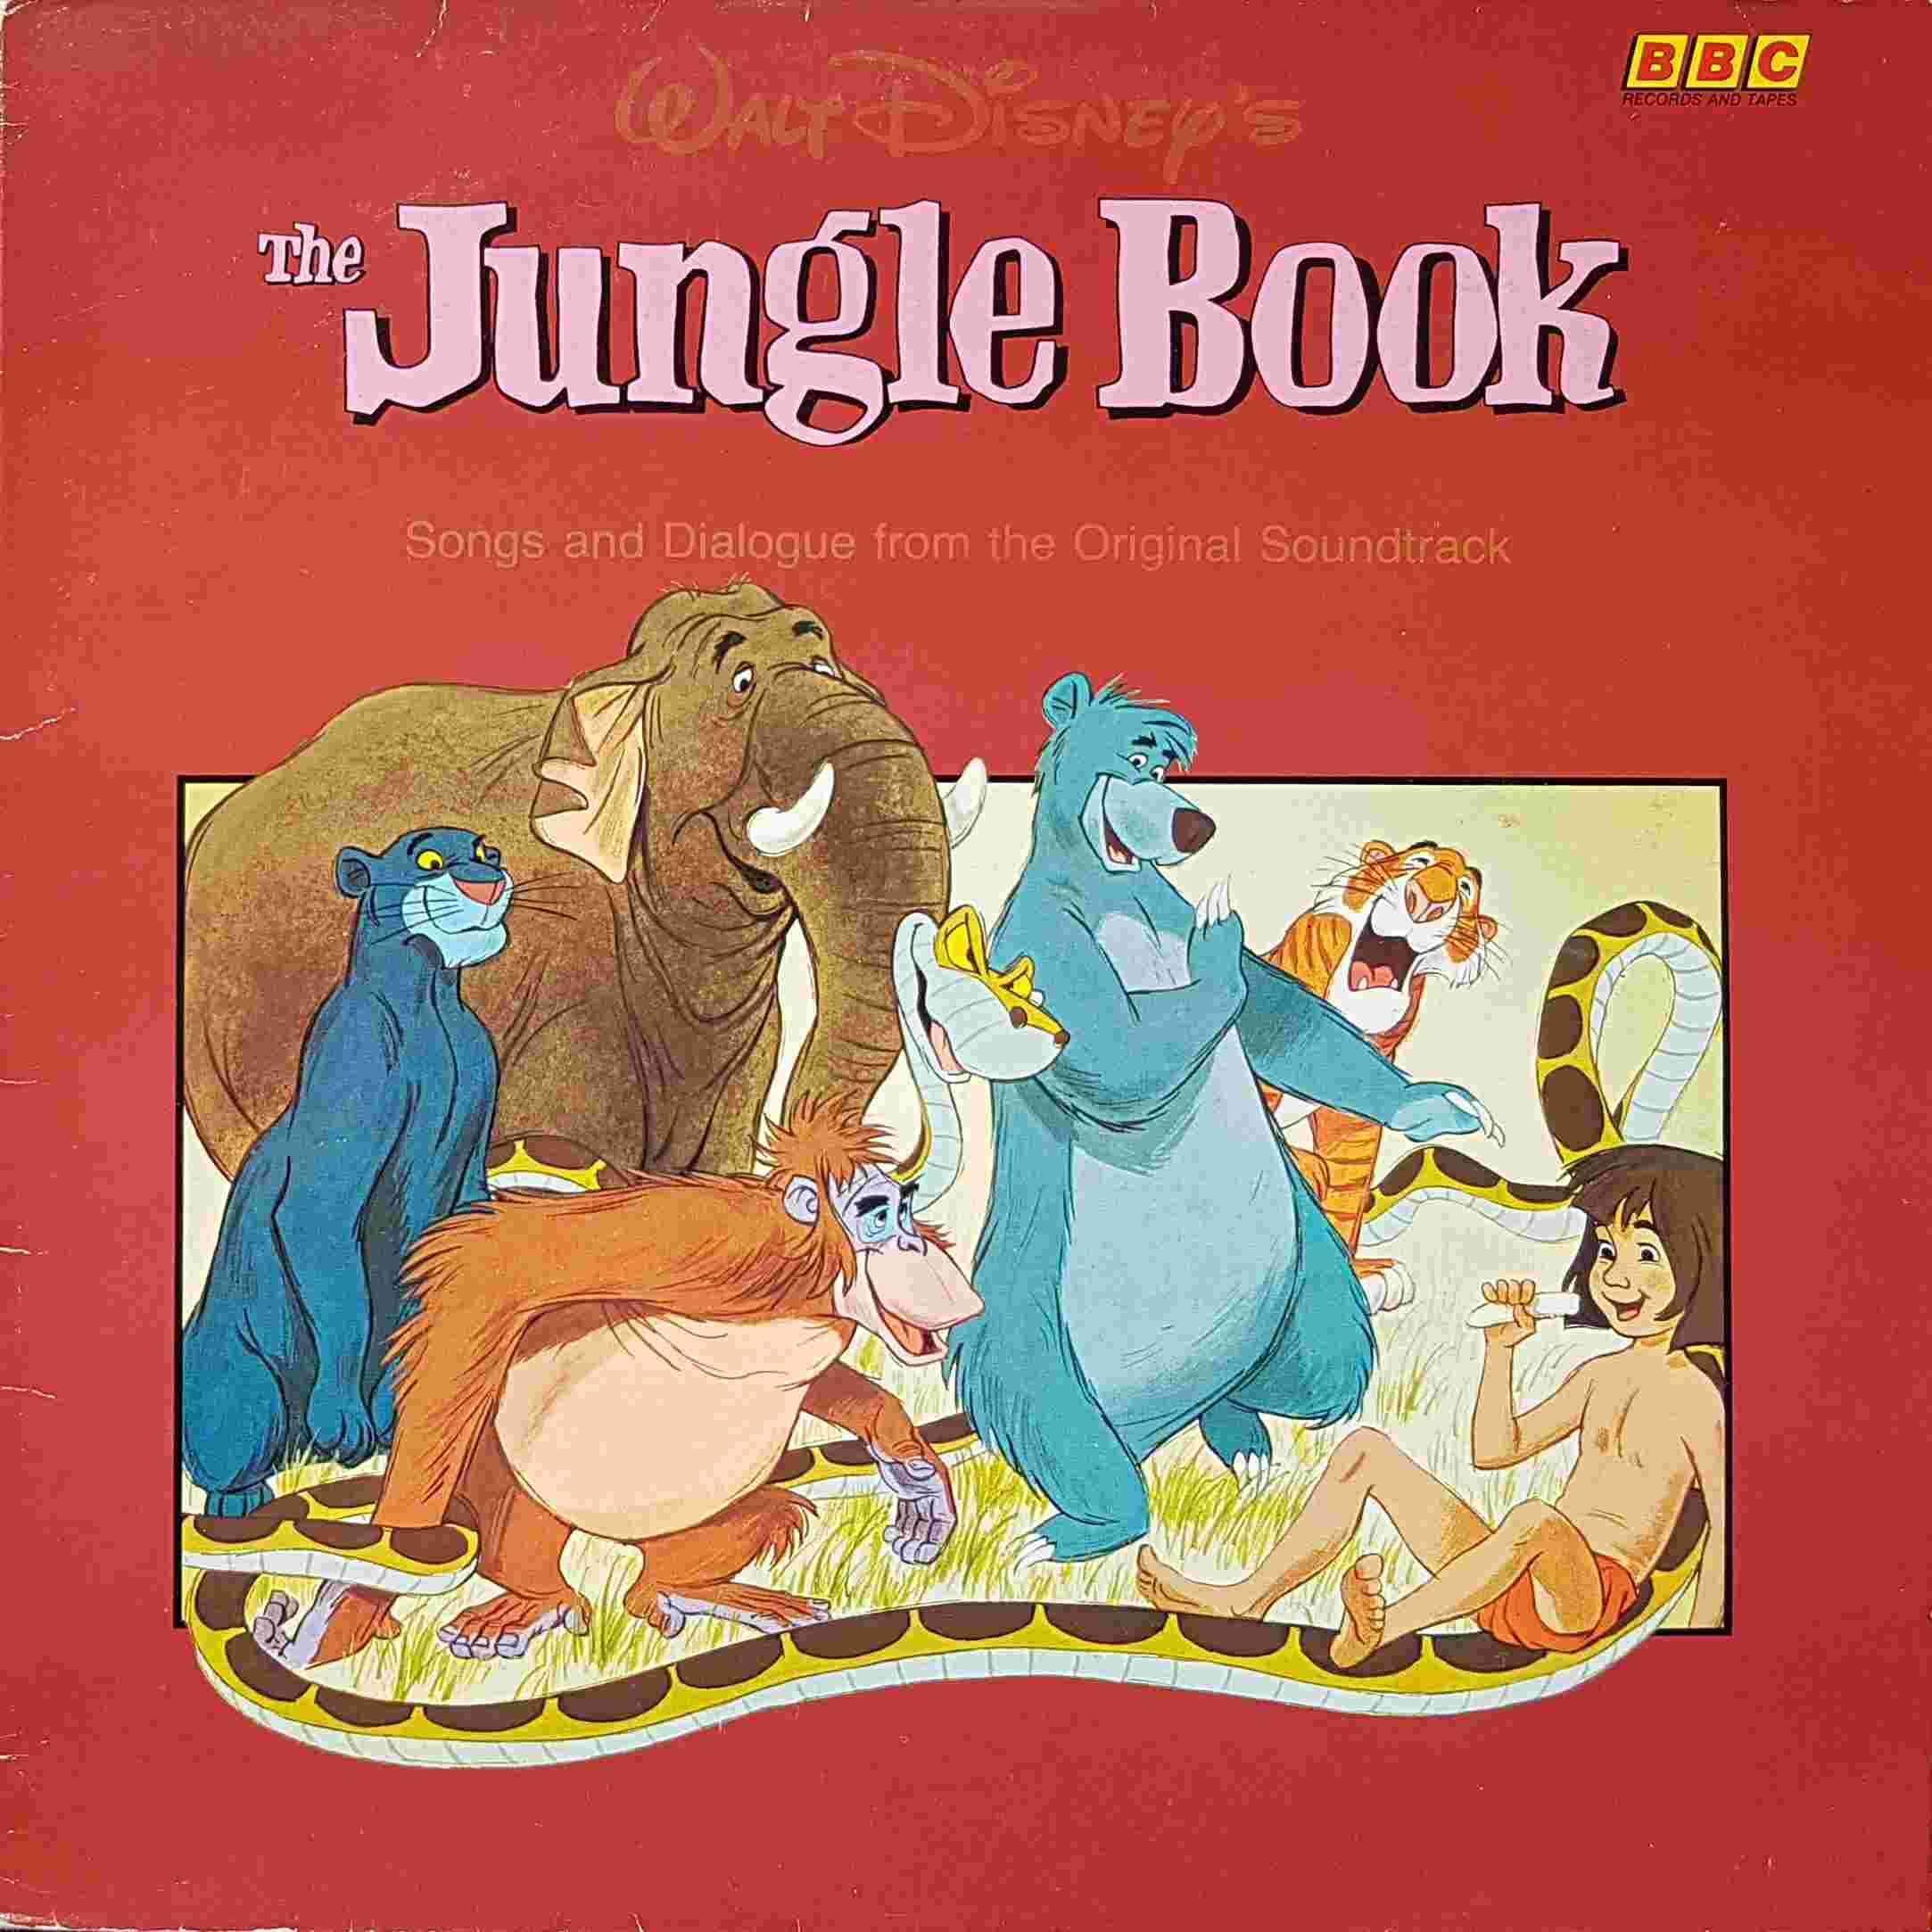 Picture of REC 536 The jungle book by artist Rudyard Kipling / Richard M. Sherman / Robert B. Sherman / Terry Gilkyson from the BBC albums - Records and Tapes library